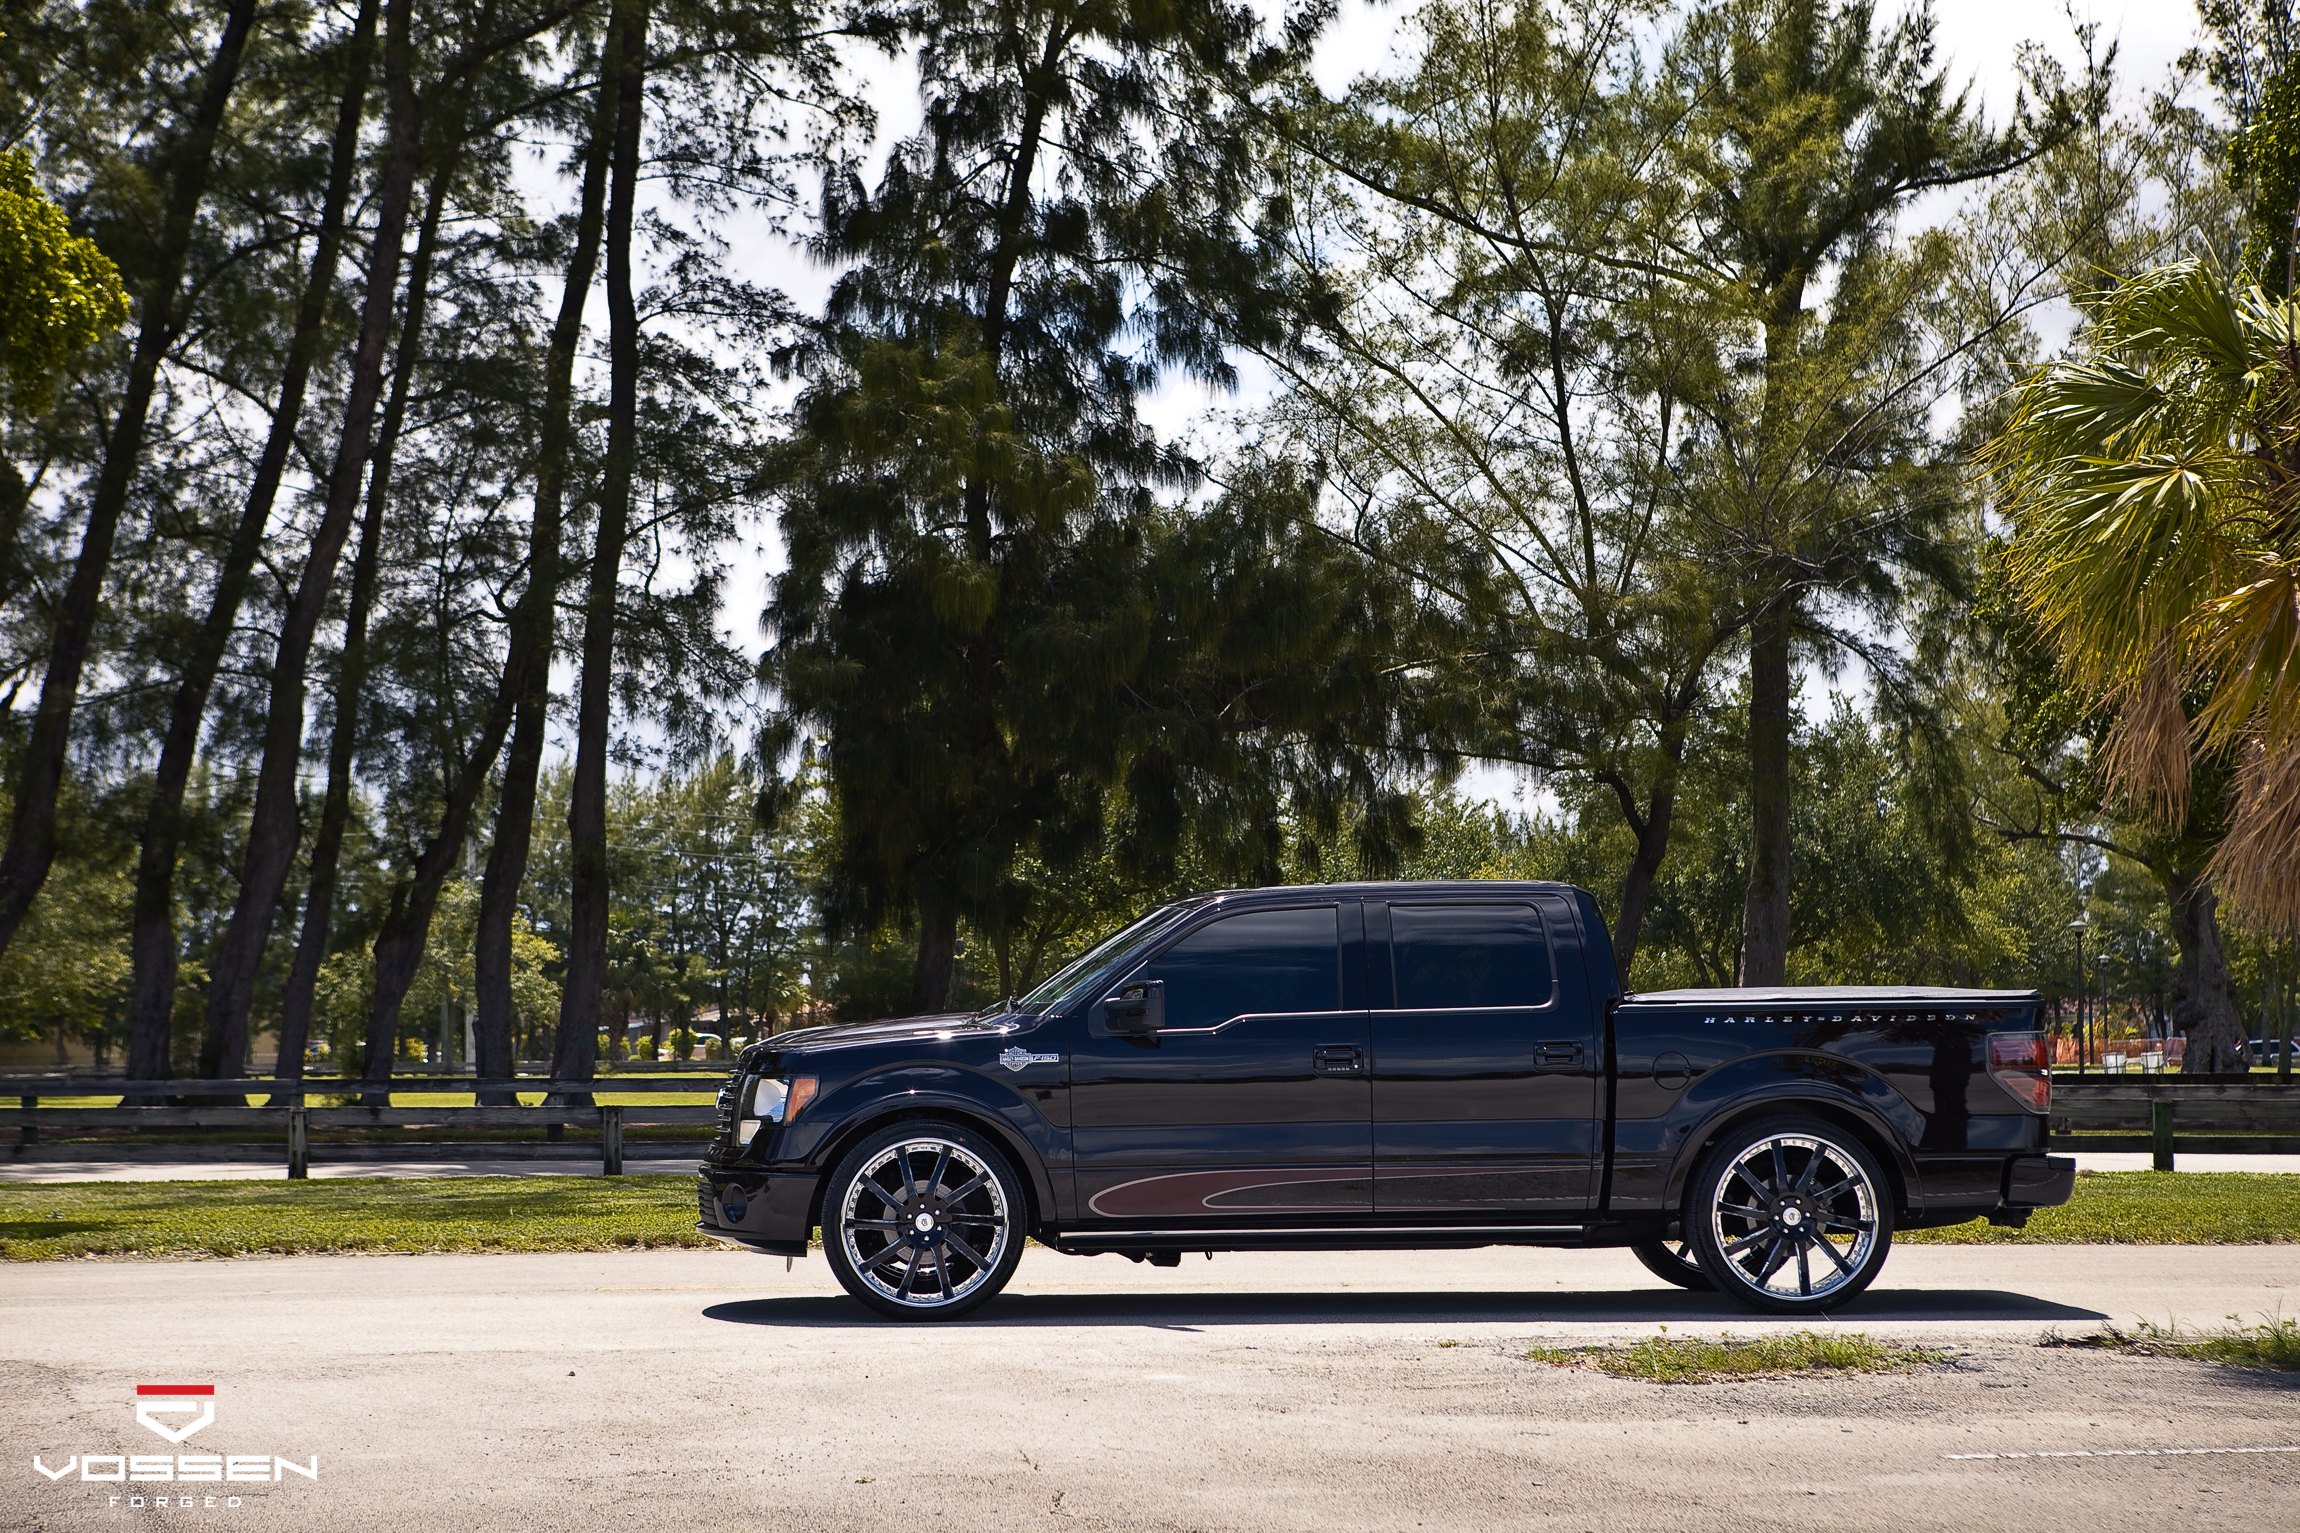 Black Ford F-150 with Custom Forged Vossen Wheels - Photo by Vossen